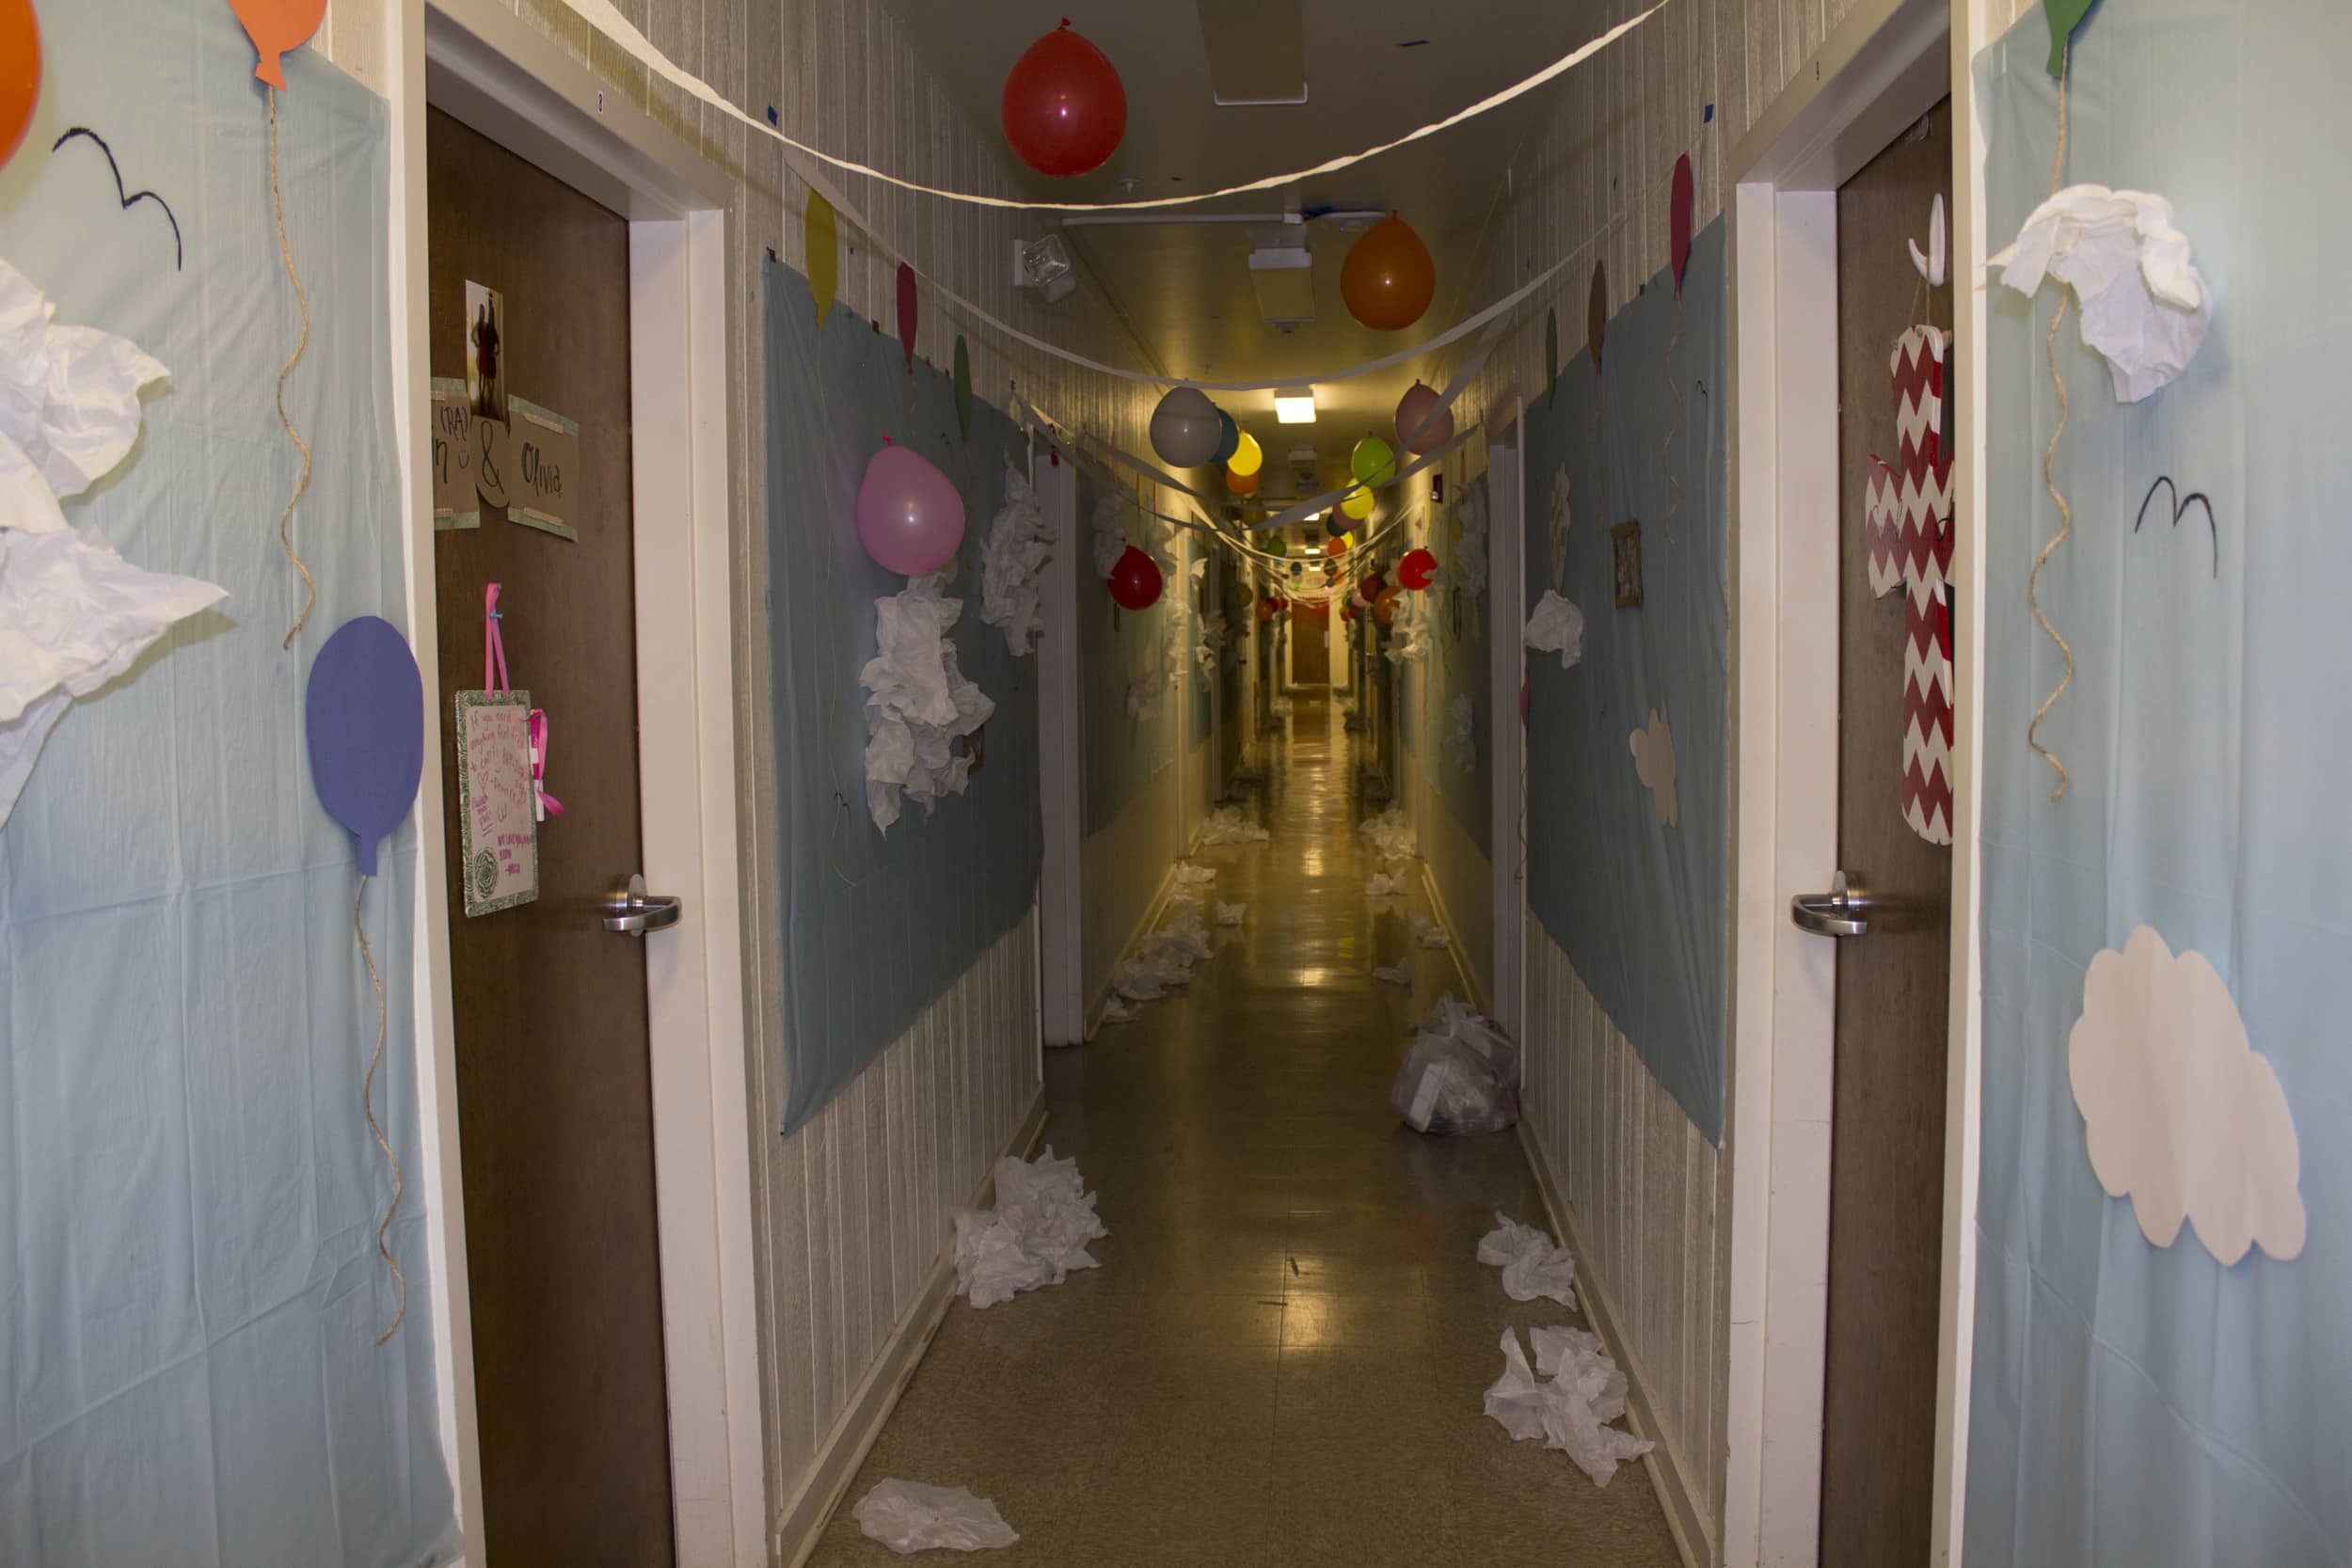  Bottom Vandiver decorated their dorm with the movie theme Up for Halloween festivities on October 31.&nbsp; 